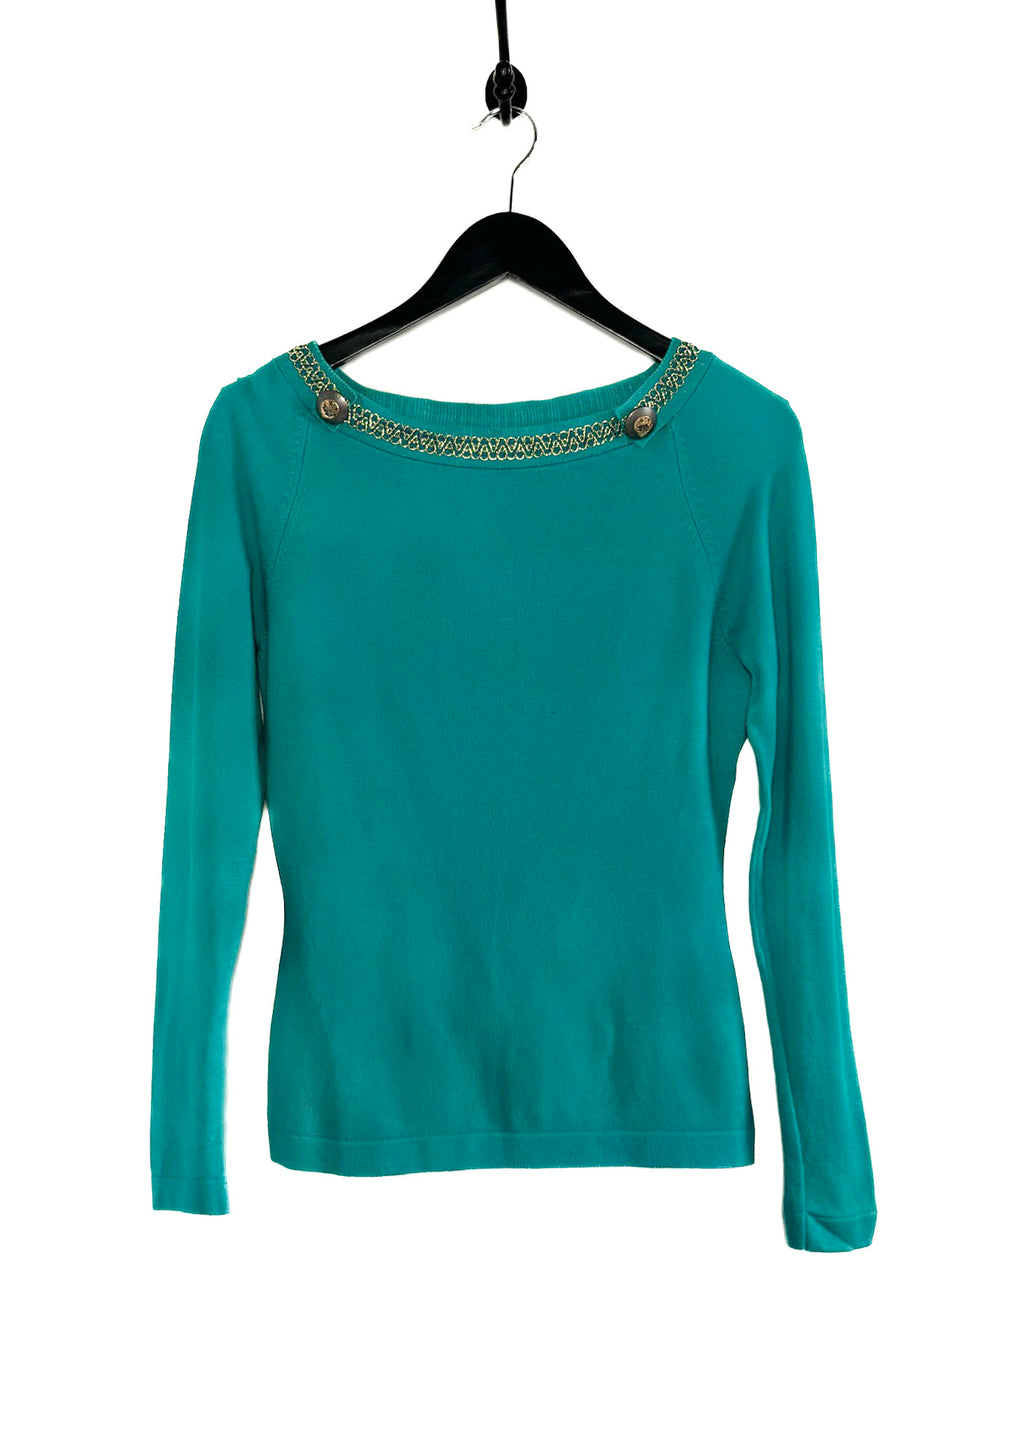 Versace Collection Turquoise Boat Neck Mesh Back Thin Sweater